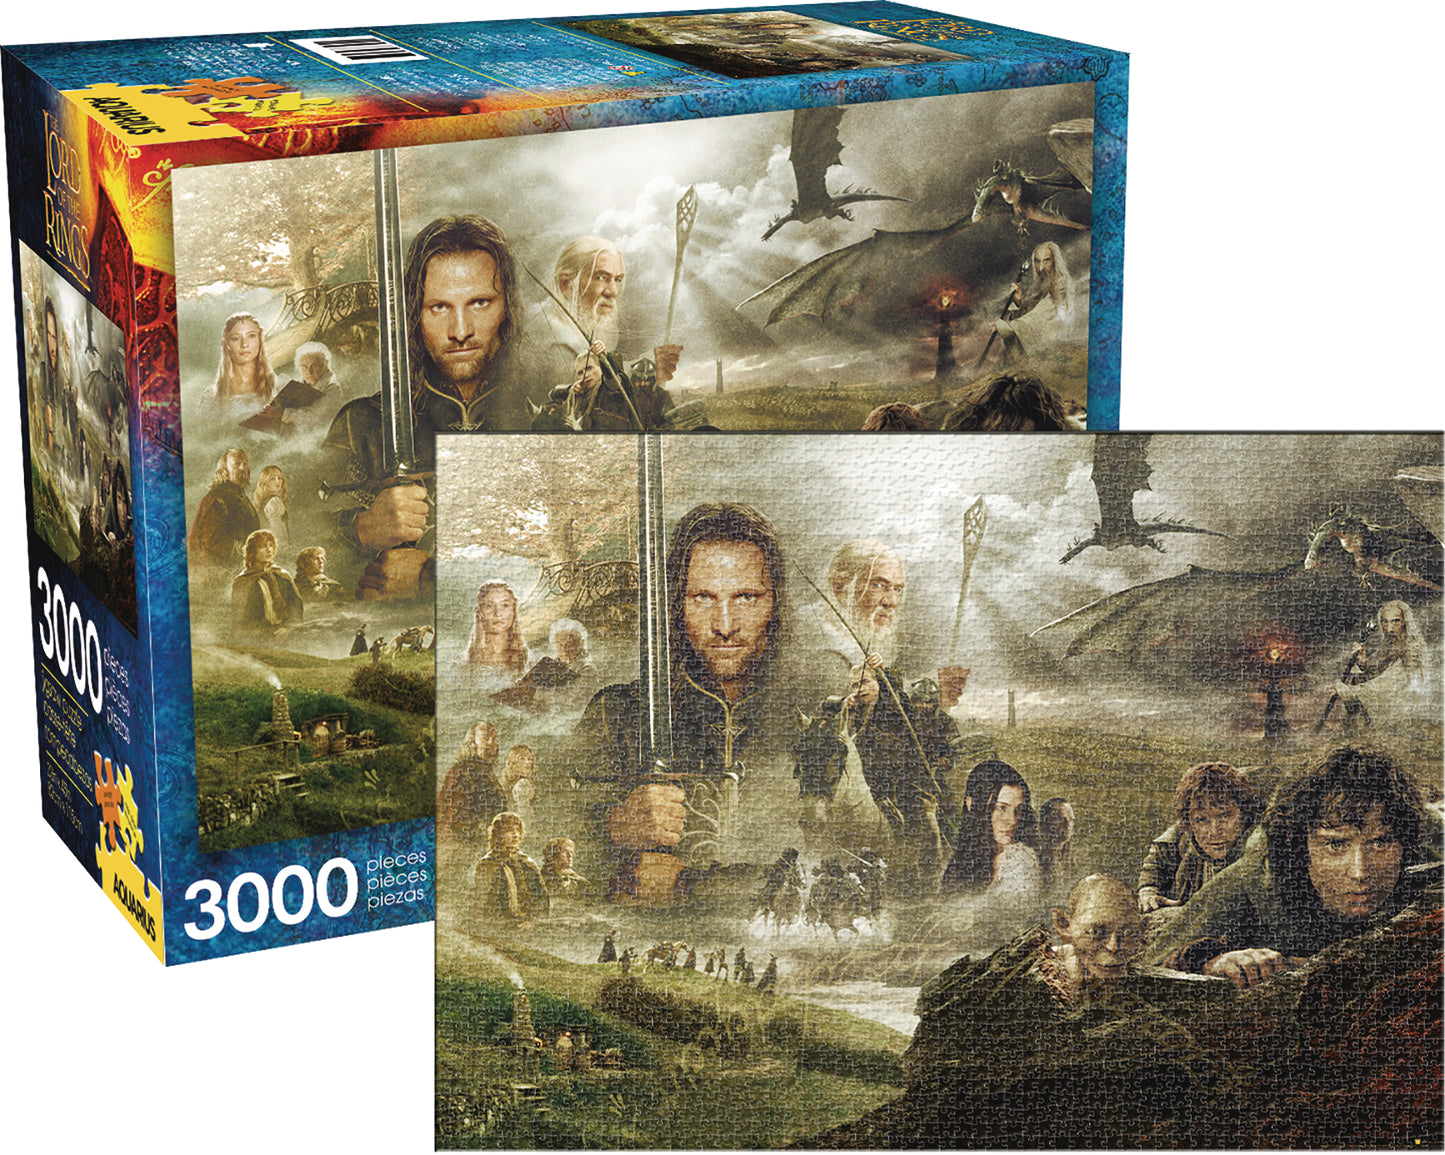 Lord of the Rings, 3000 Piece Puzzle